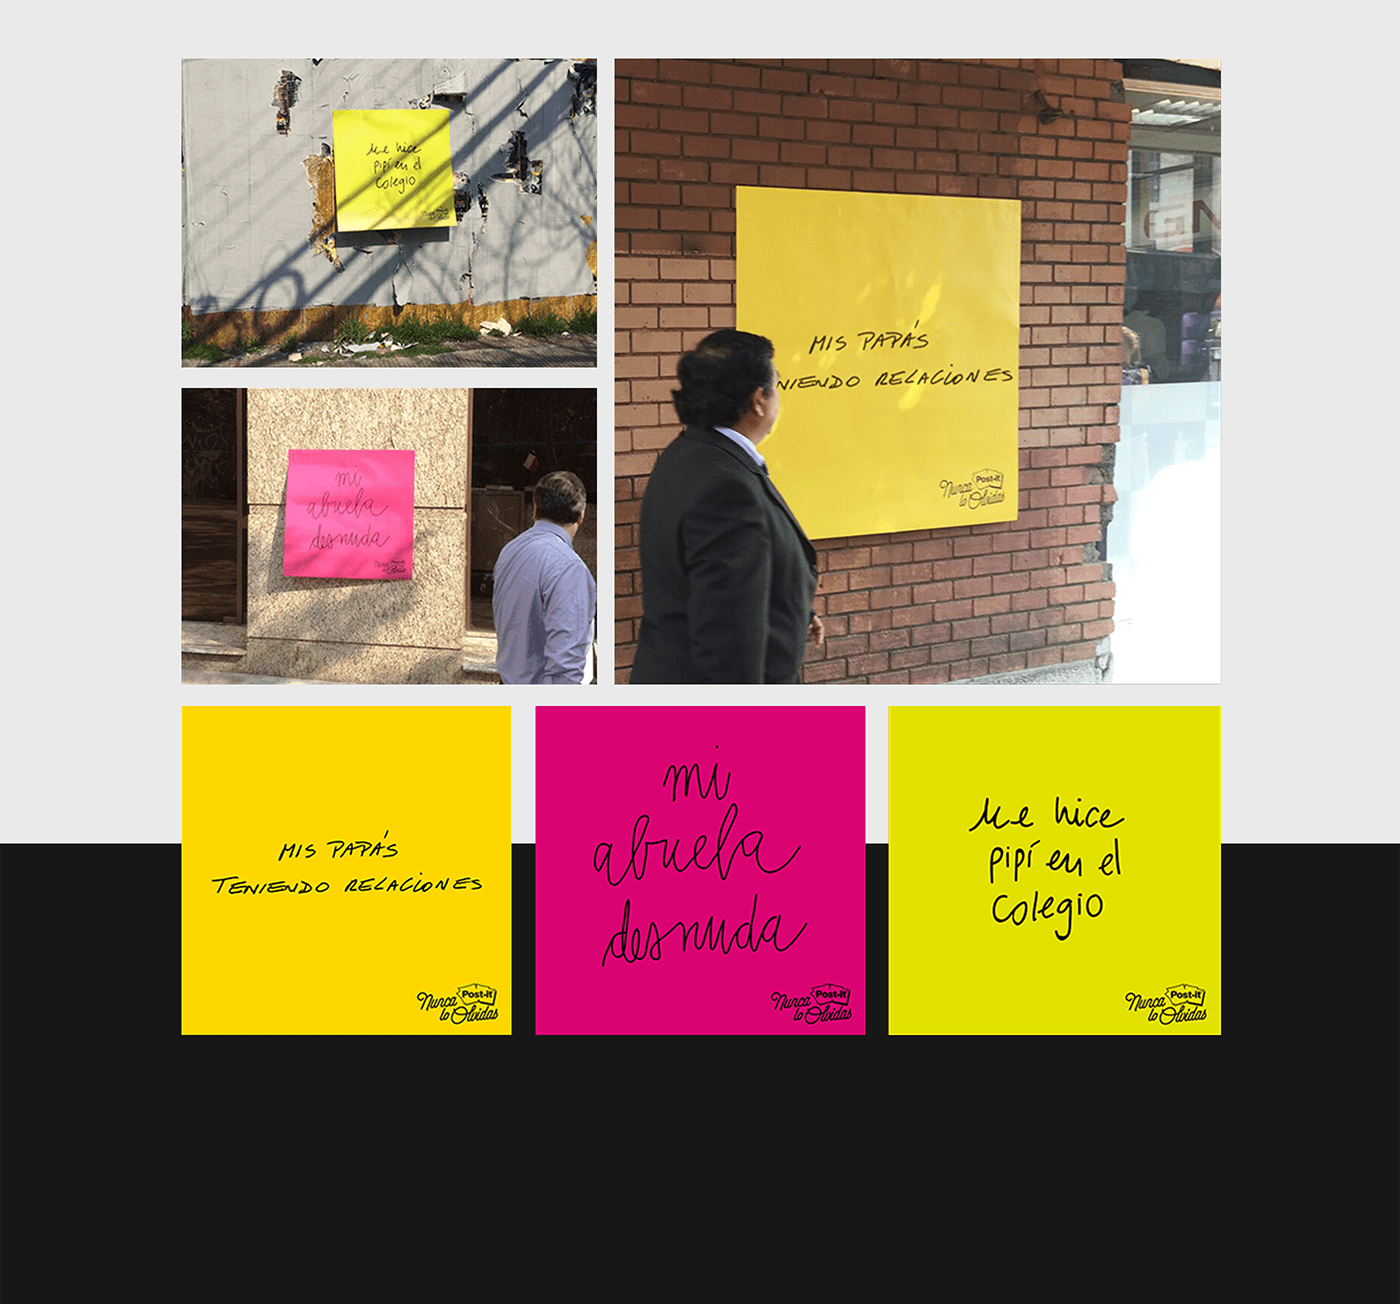 Post It press Outdoor amarillo rosado Verde green yellow pink never forget